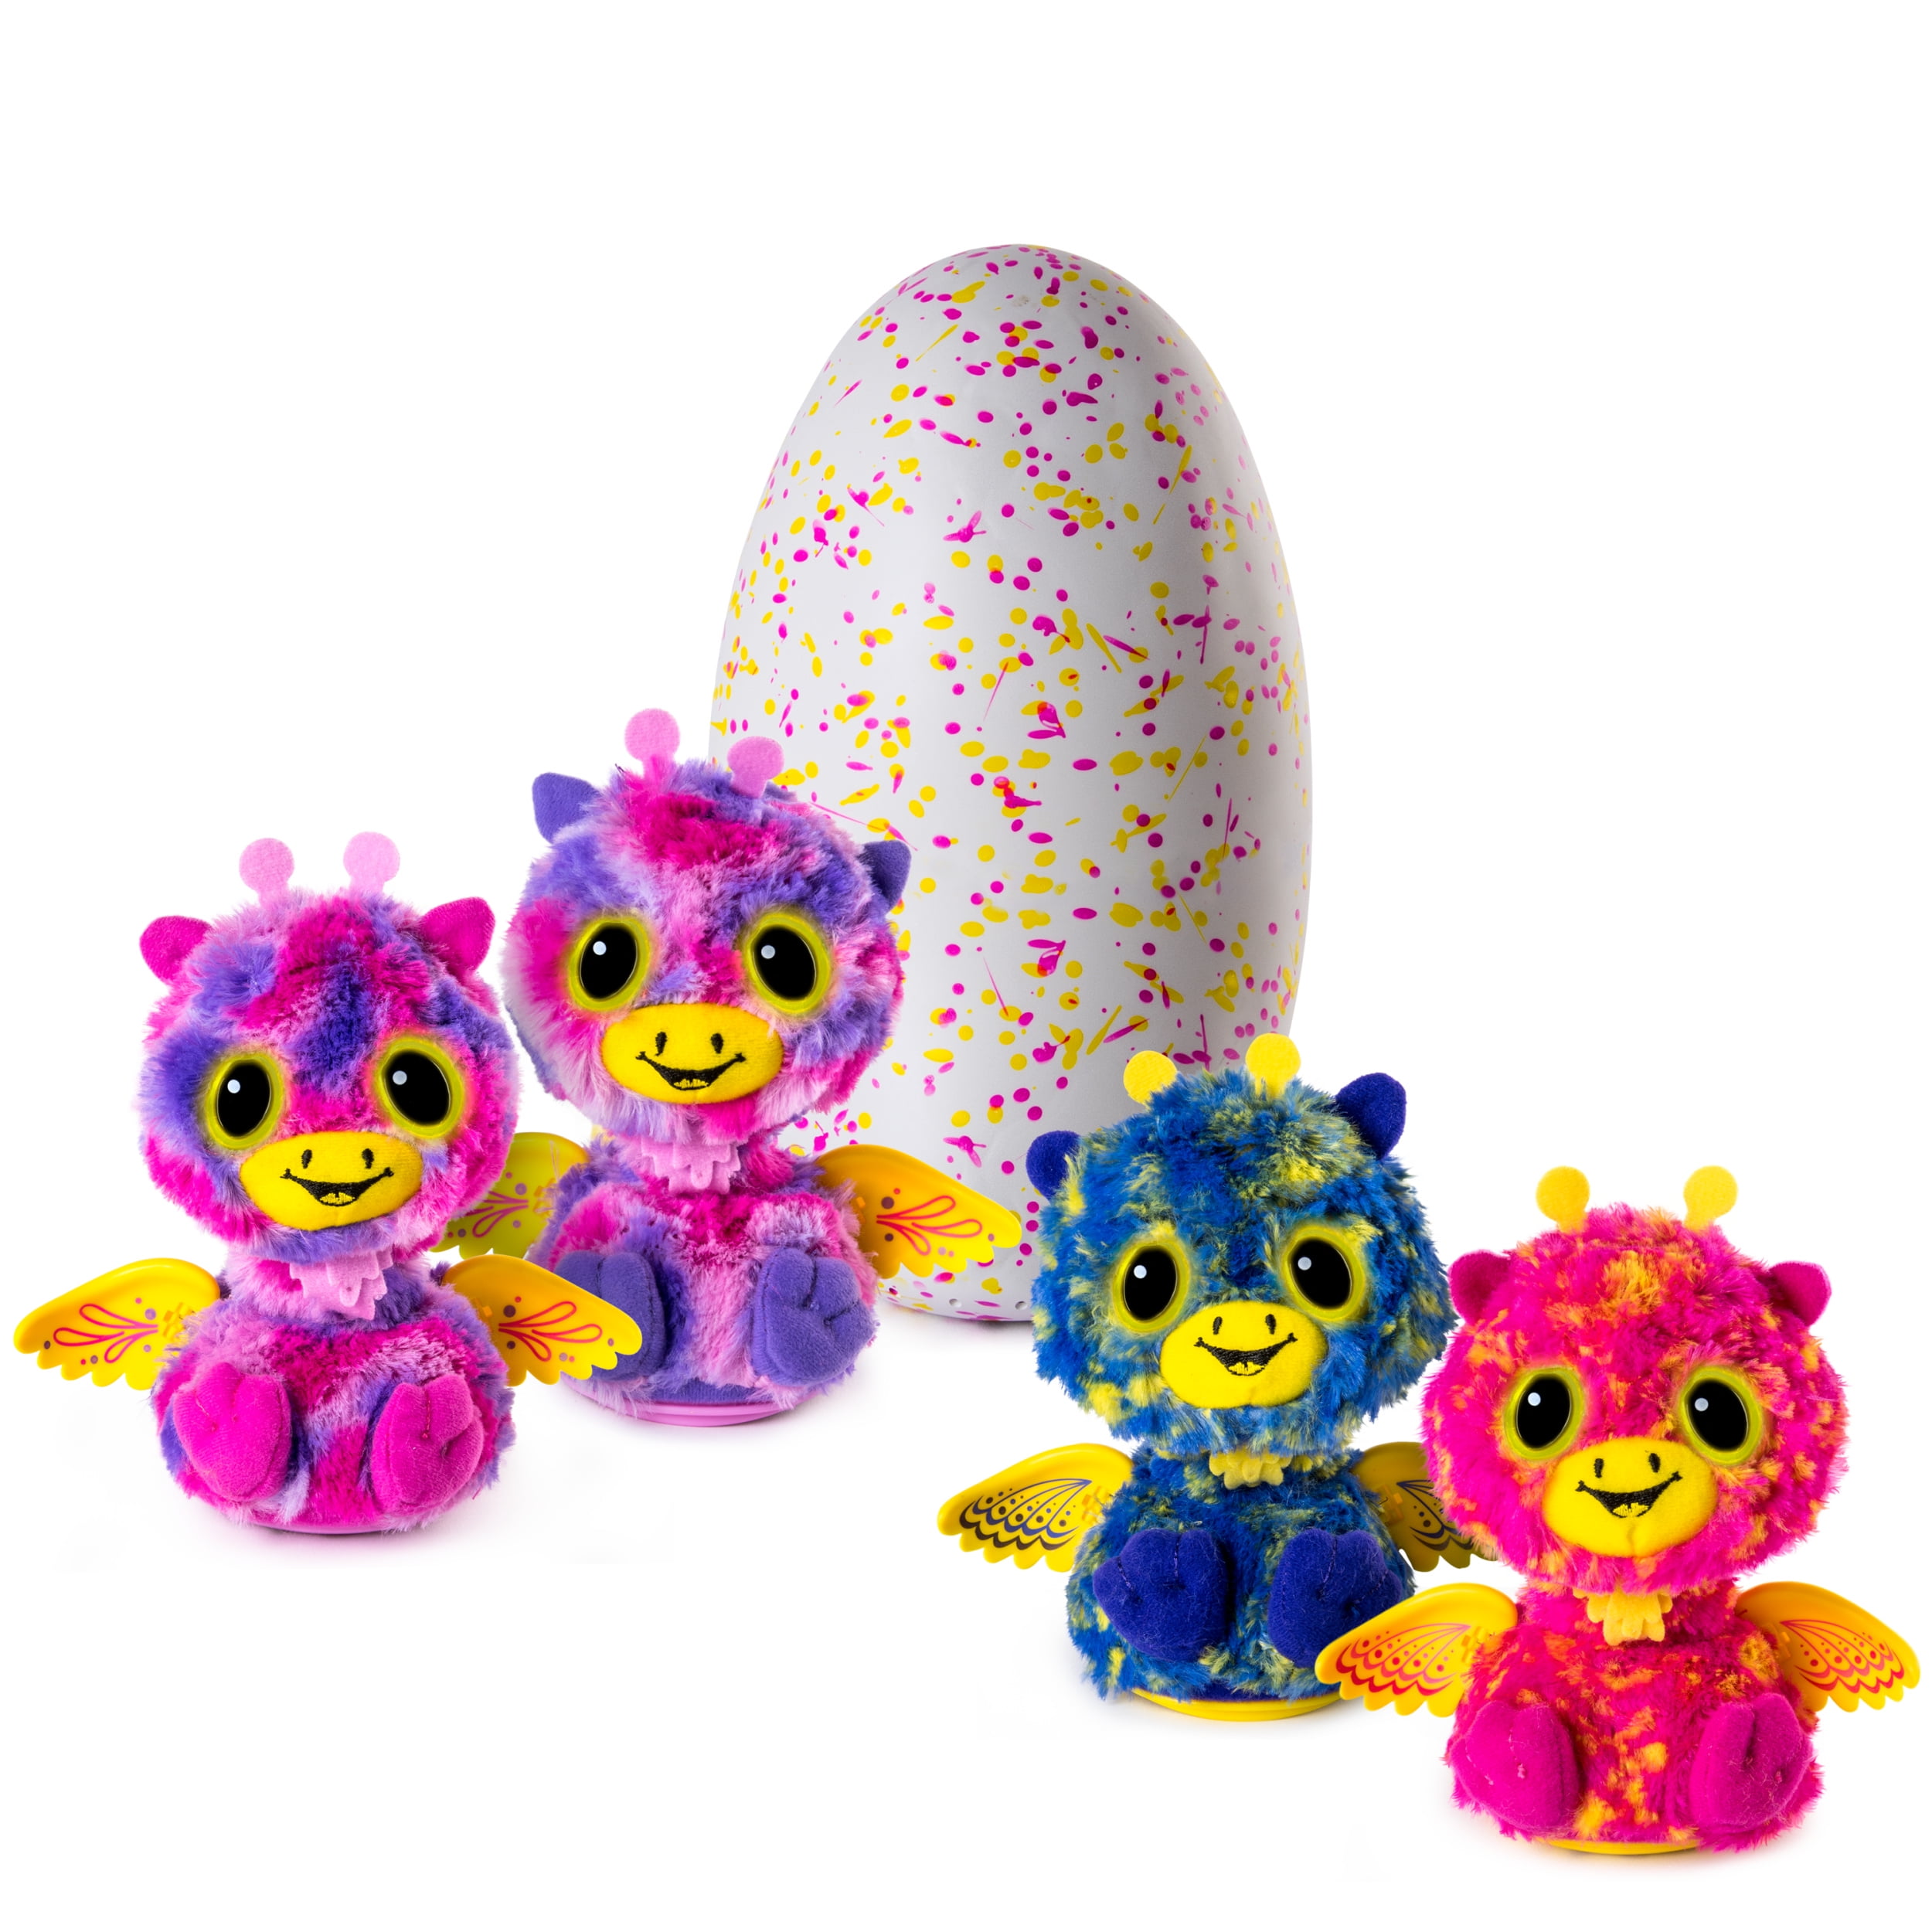 Details about   HATCHIMAL GLITTERING Garden Hatching Eggs My Price ONLY $69.96 